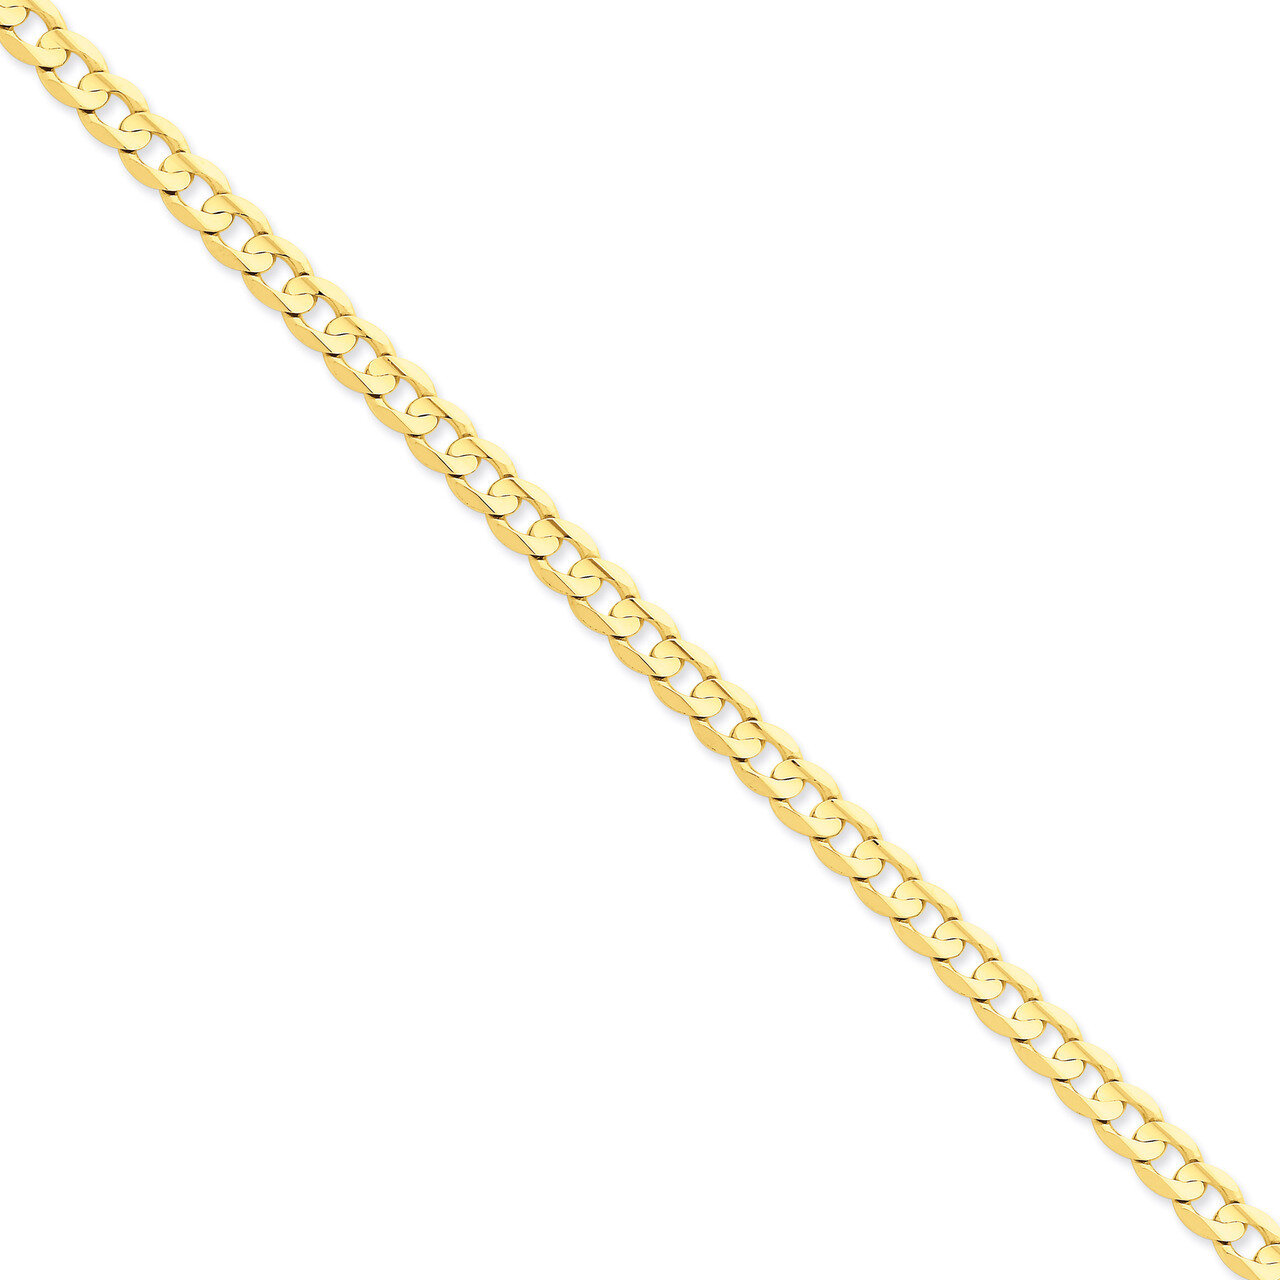 6.75mm Open Concave Curb Chain 8 Inch 14k Gold LCR180-8